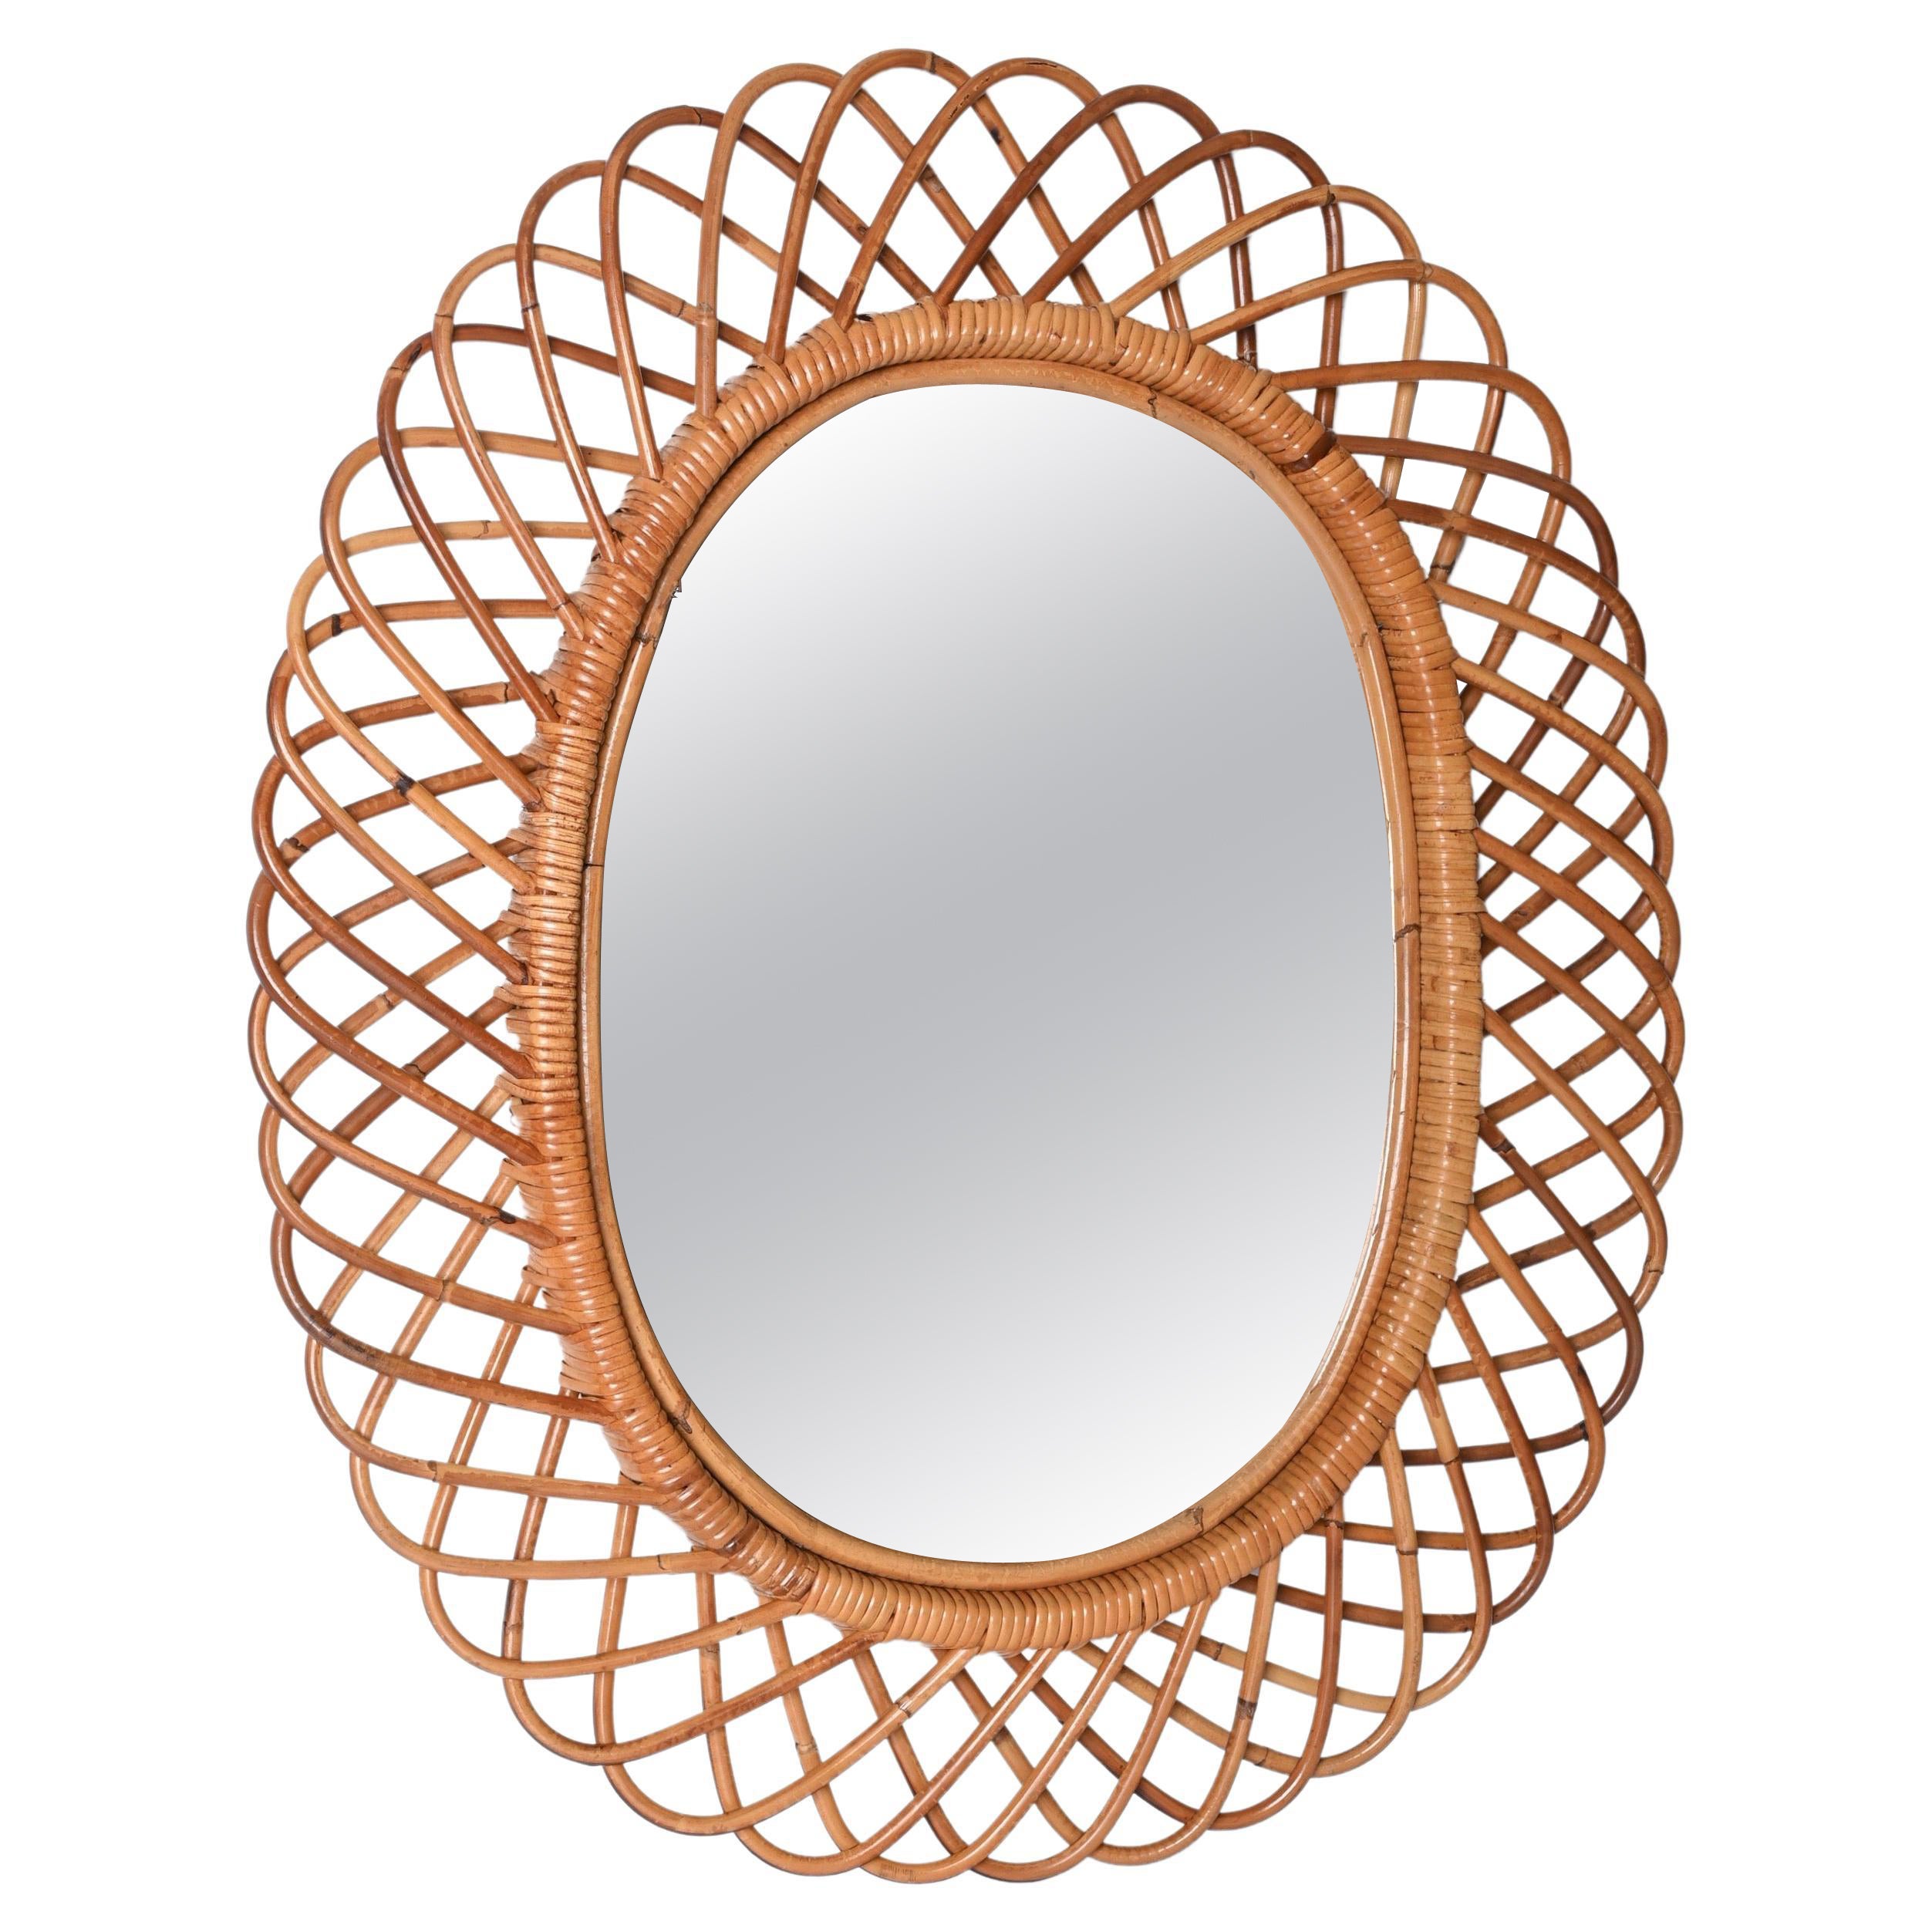 Midcentury French Riviera Bamboo and Rattan Oval Mirror Franco Albini Italy 1960